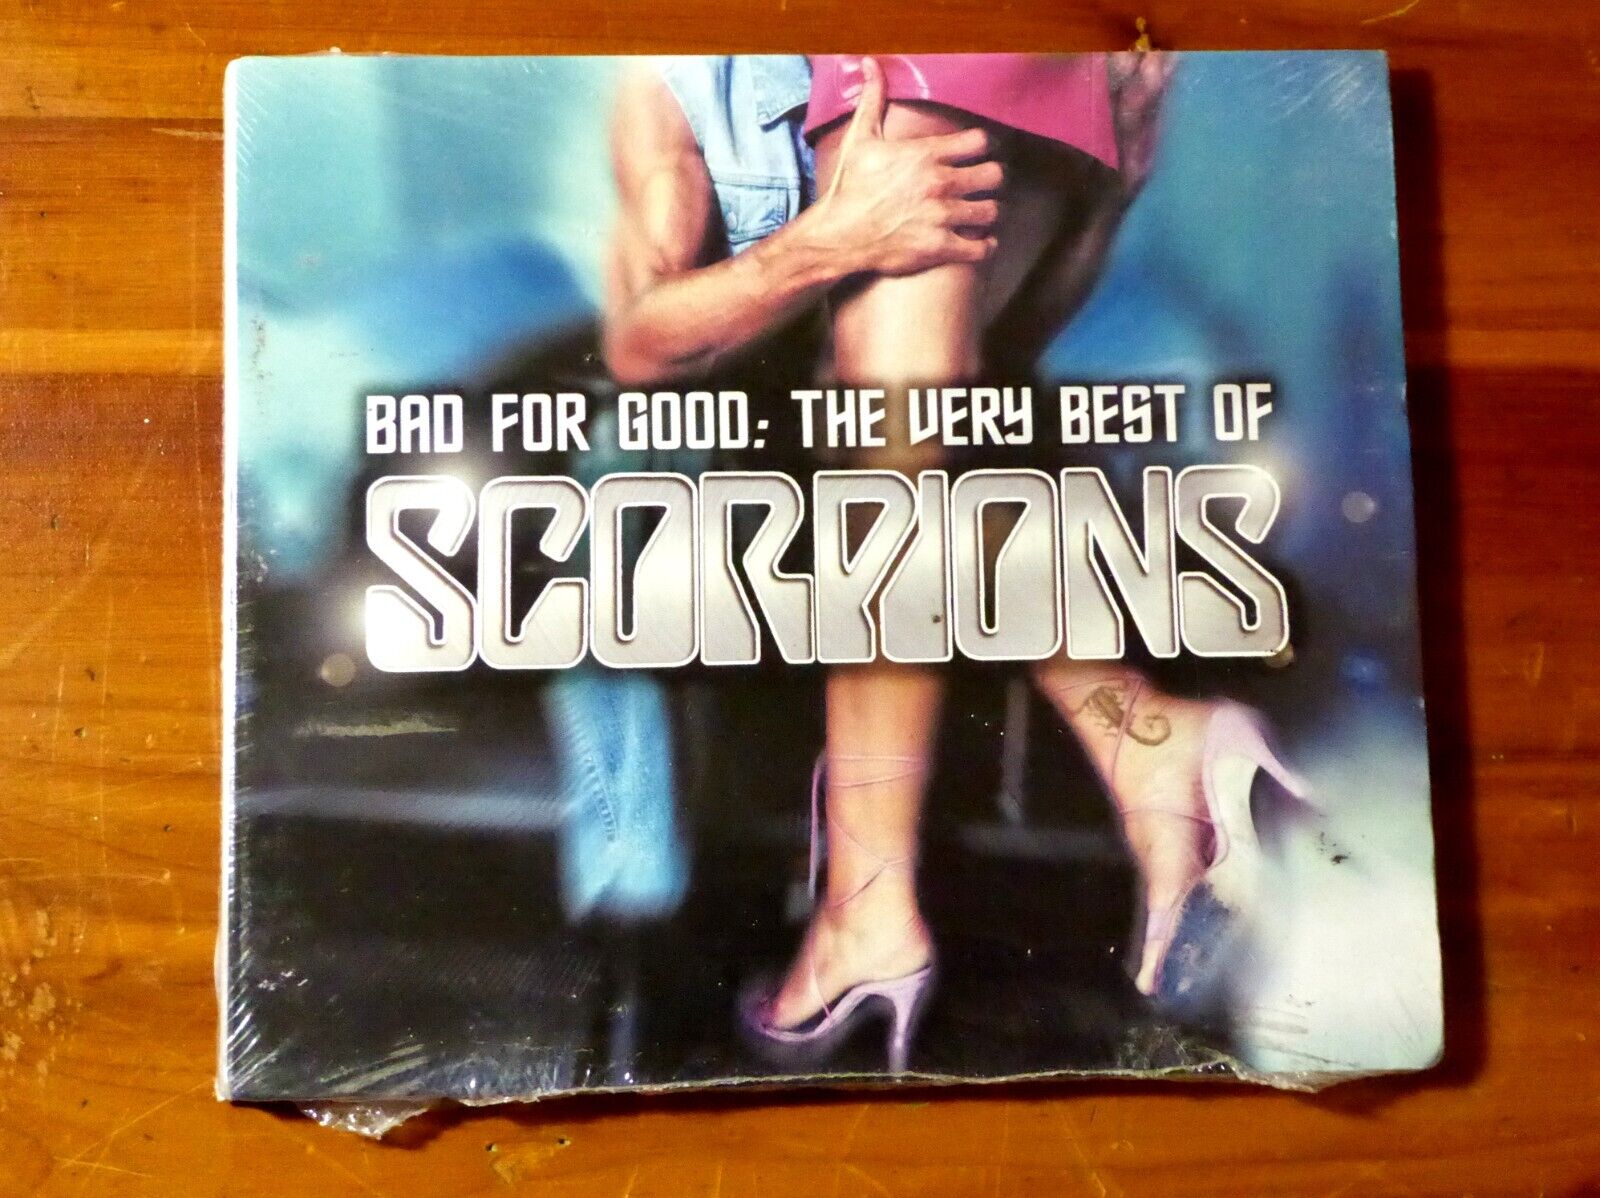 NEW! SCORPIONS *BAD FOR GOOD: THE VERY BEST OF SCORPIONS* DIGIPAK, FAST SHIP!